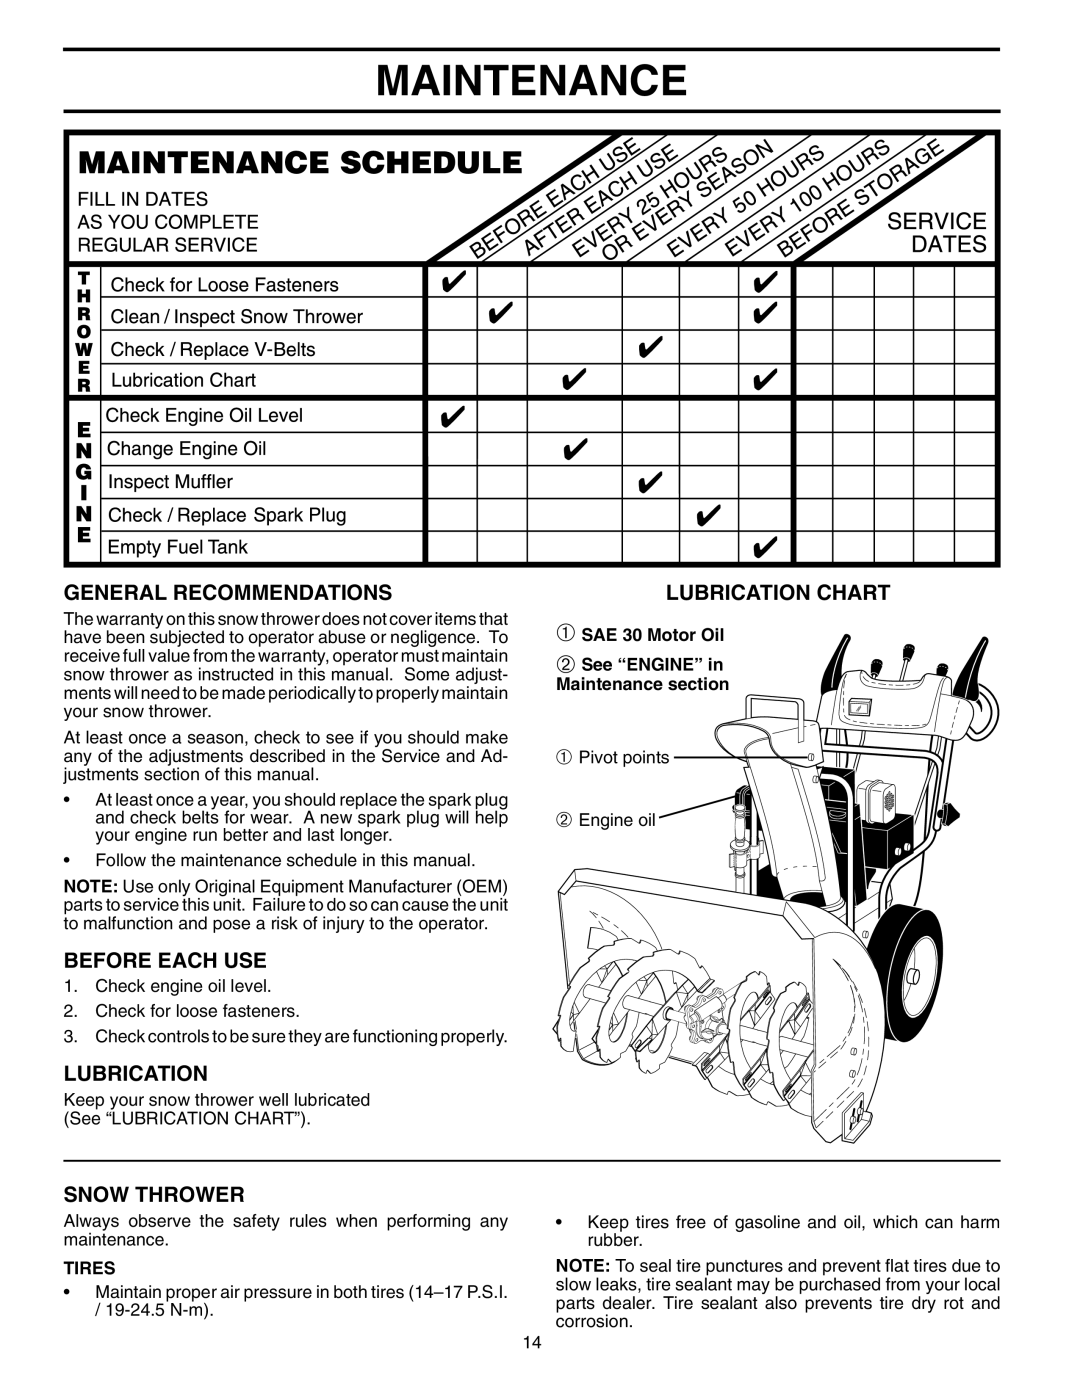 Husqvarna 10527SBE Maintenance, General Recommendations, Before Each Use, Snow Thrower, Lubrication Chart, Tires 